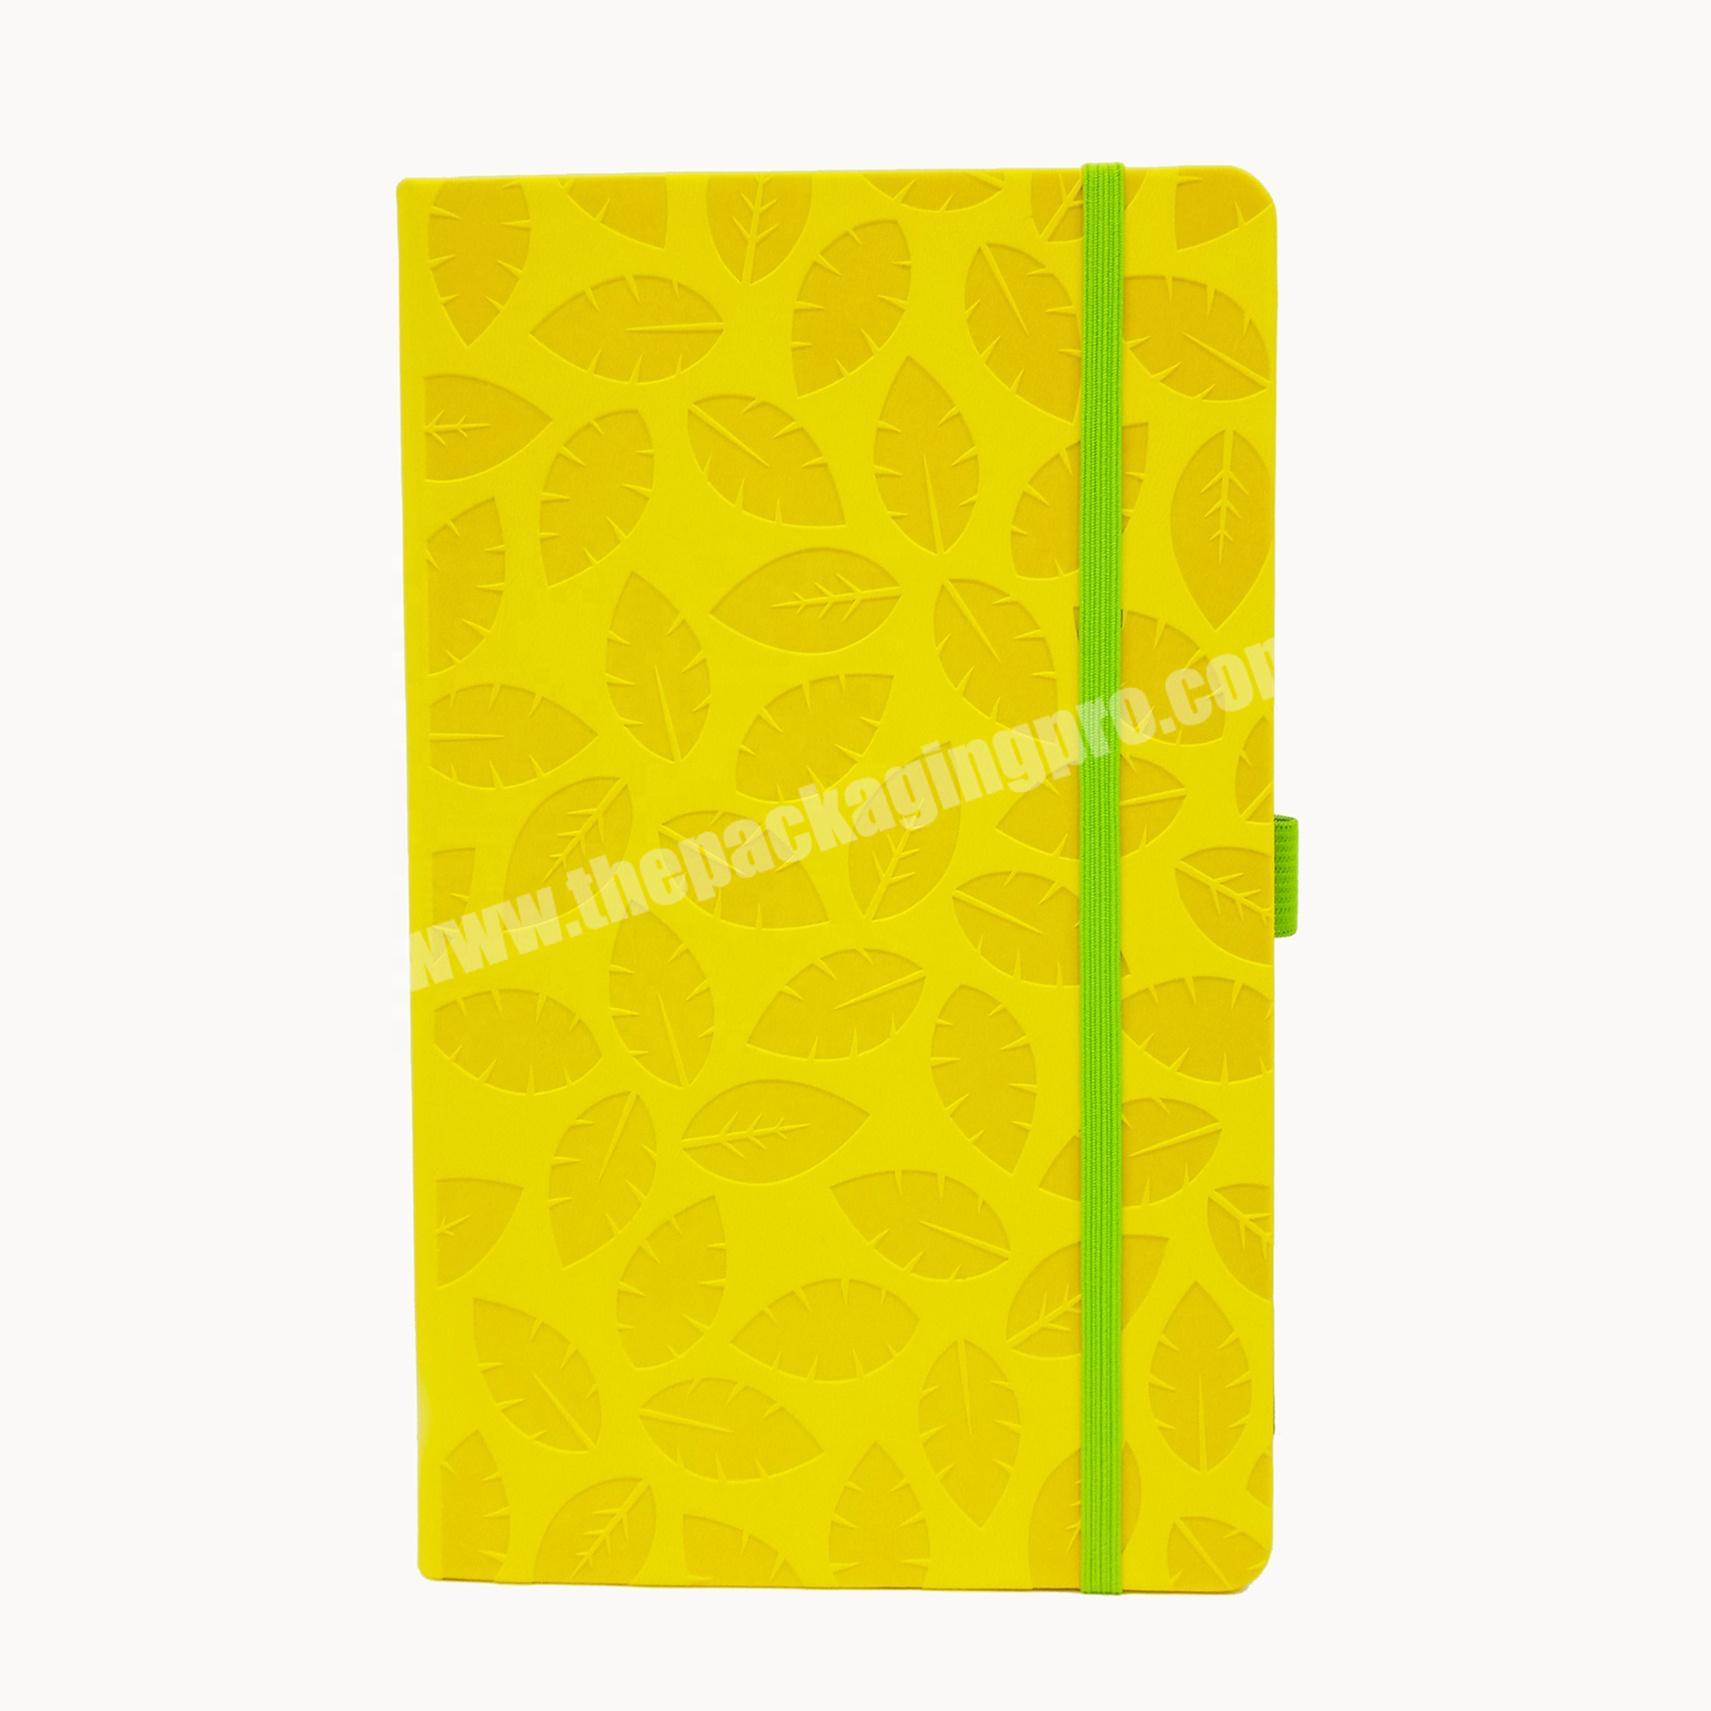 High quality pu leather notebook school diary for student organizer planner